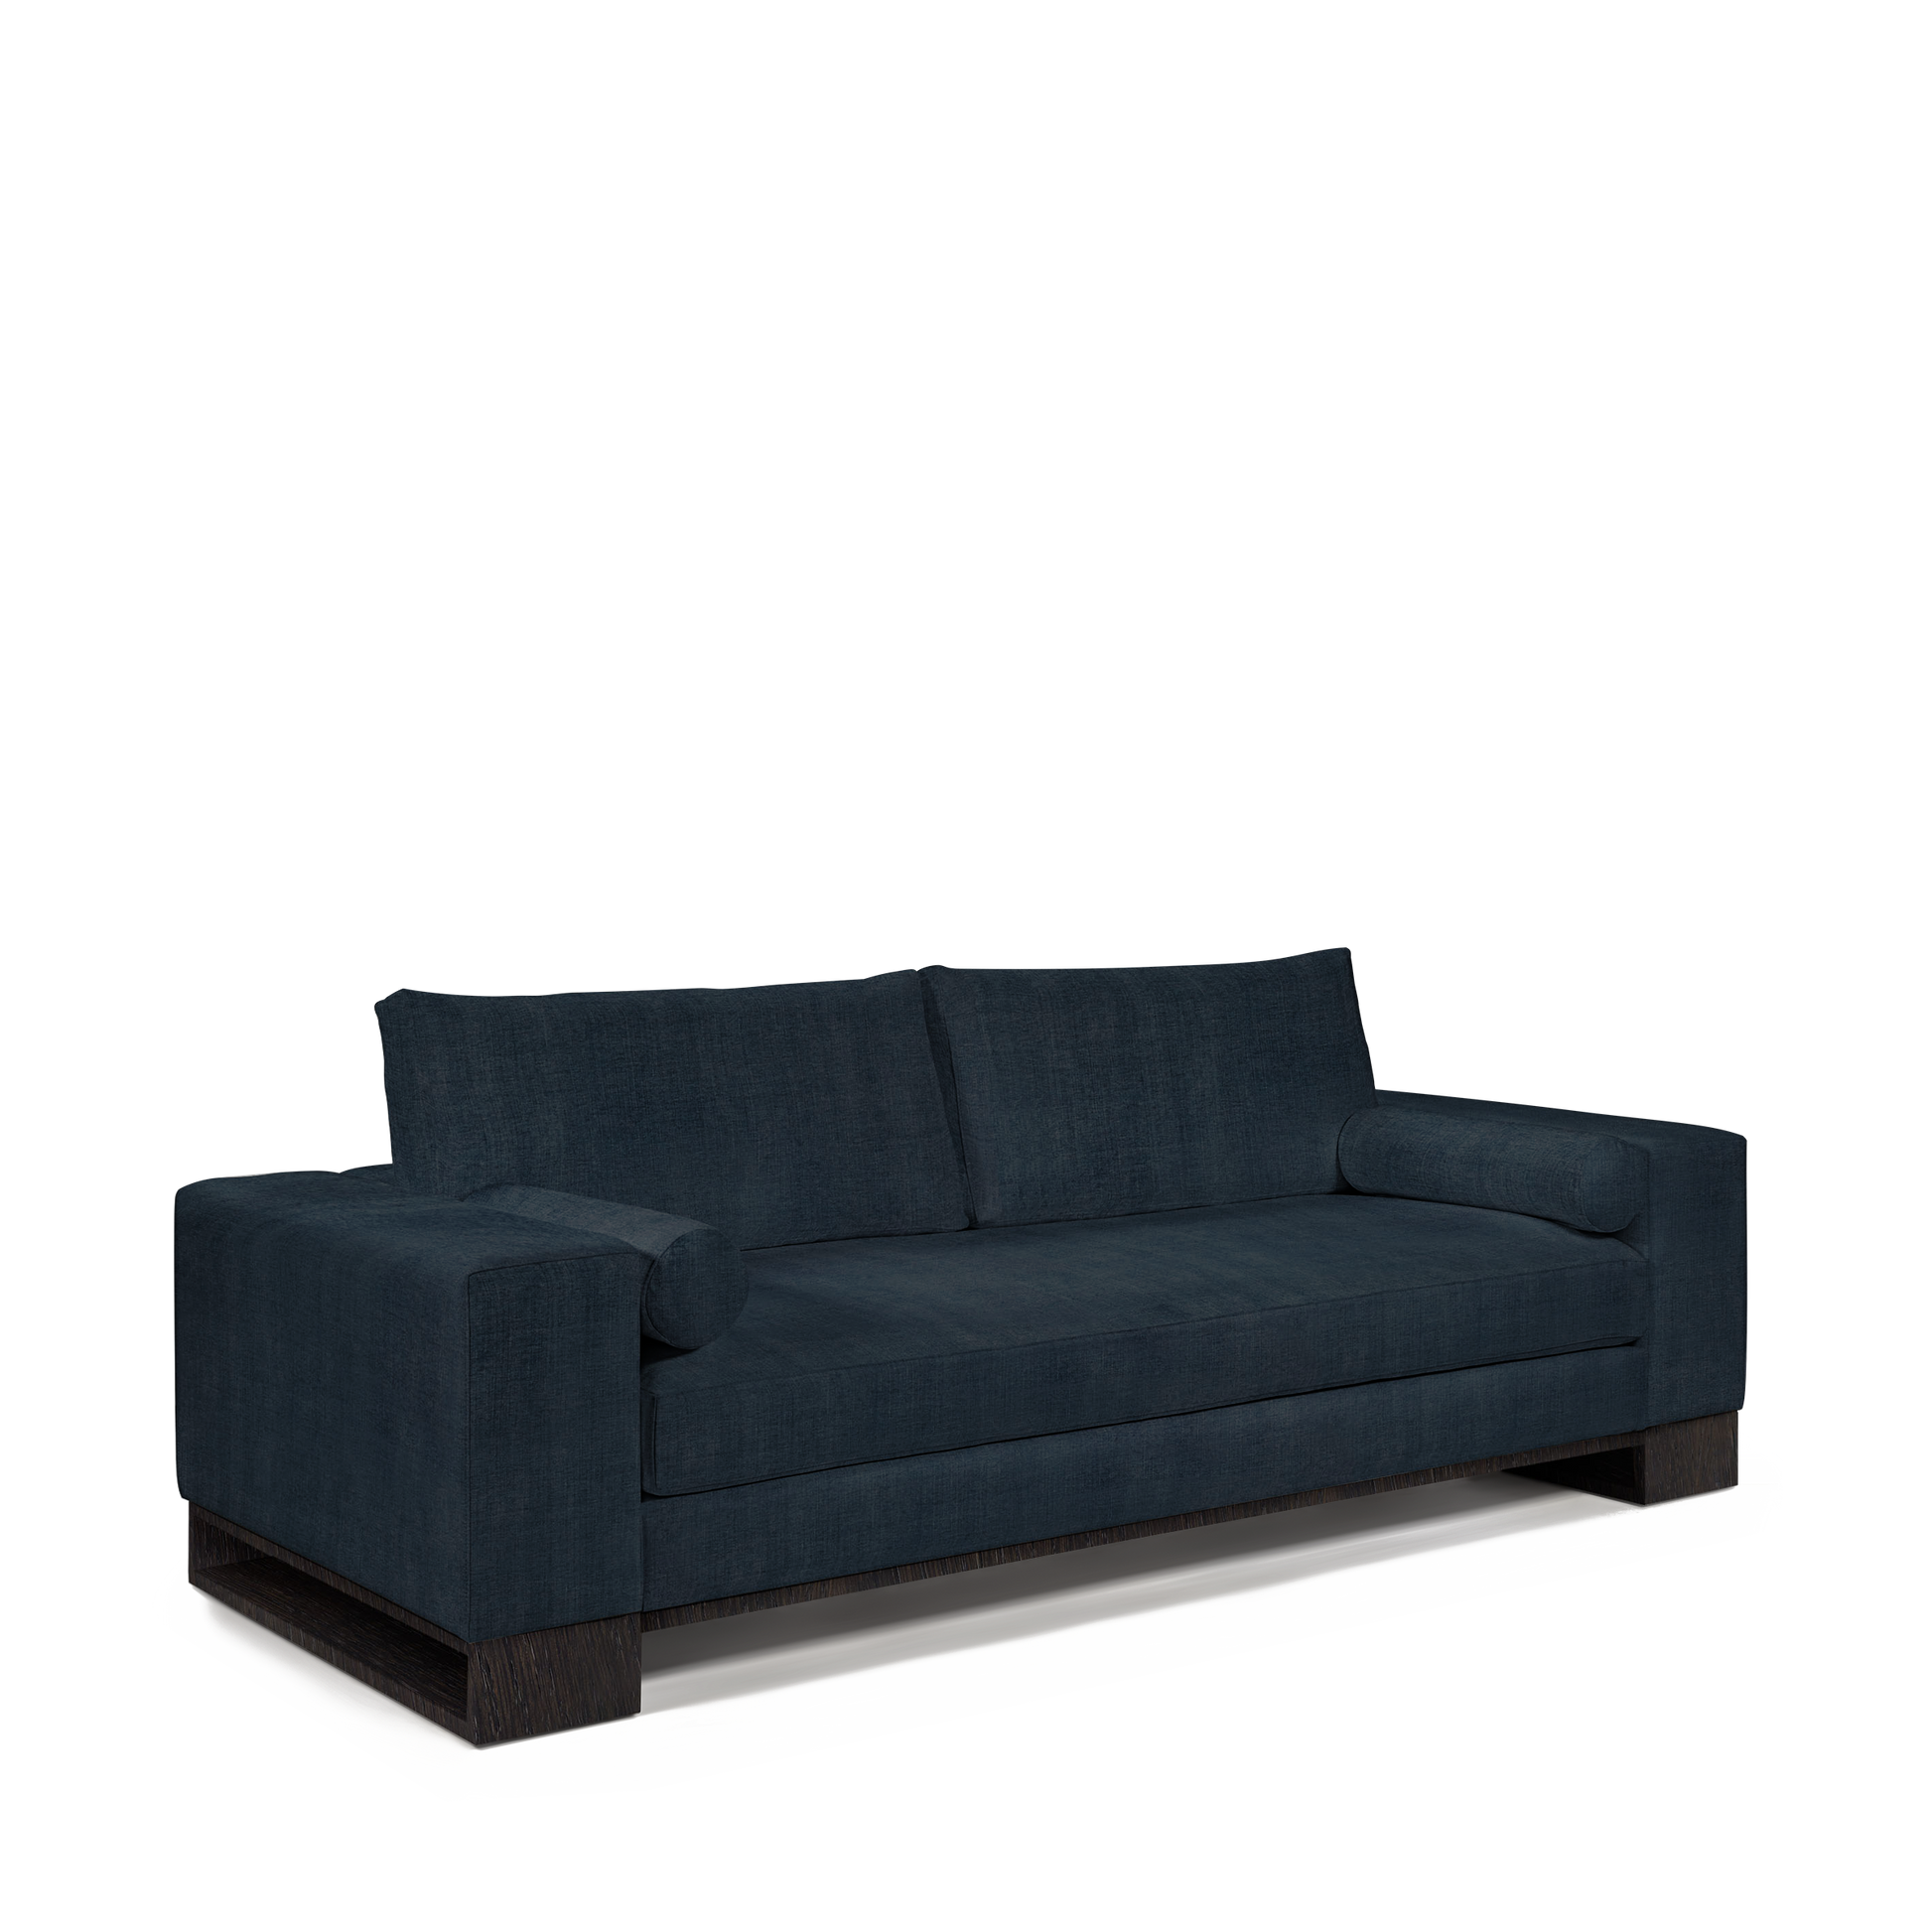 TERRA 2,5-seater sofa with dark linco blue textile and chocolate wood legs 